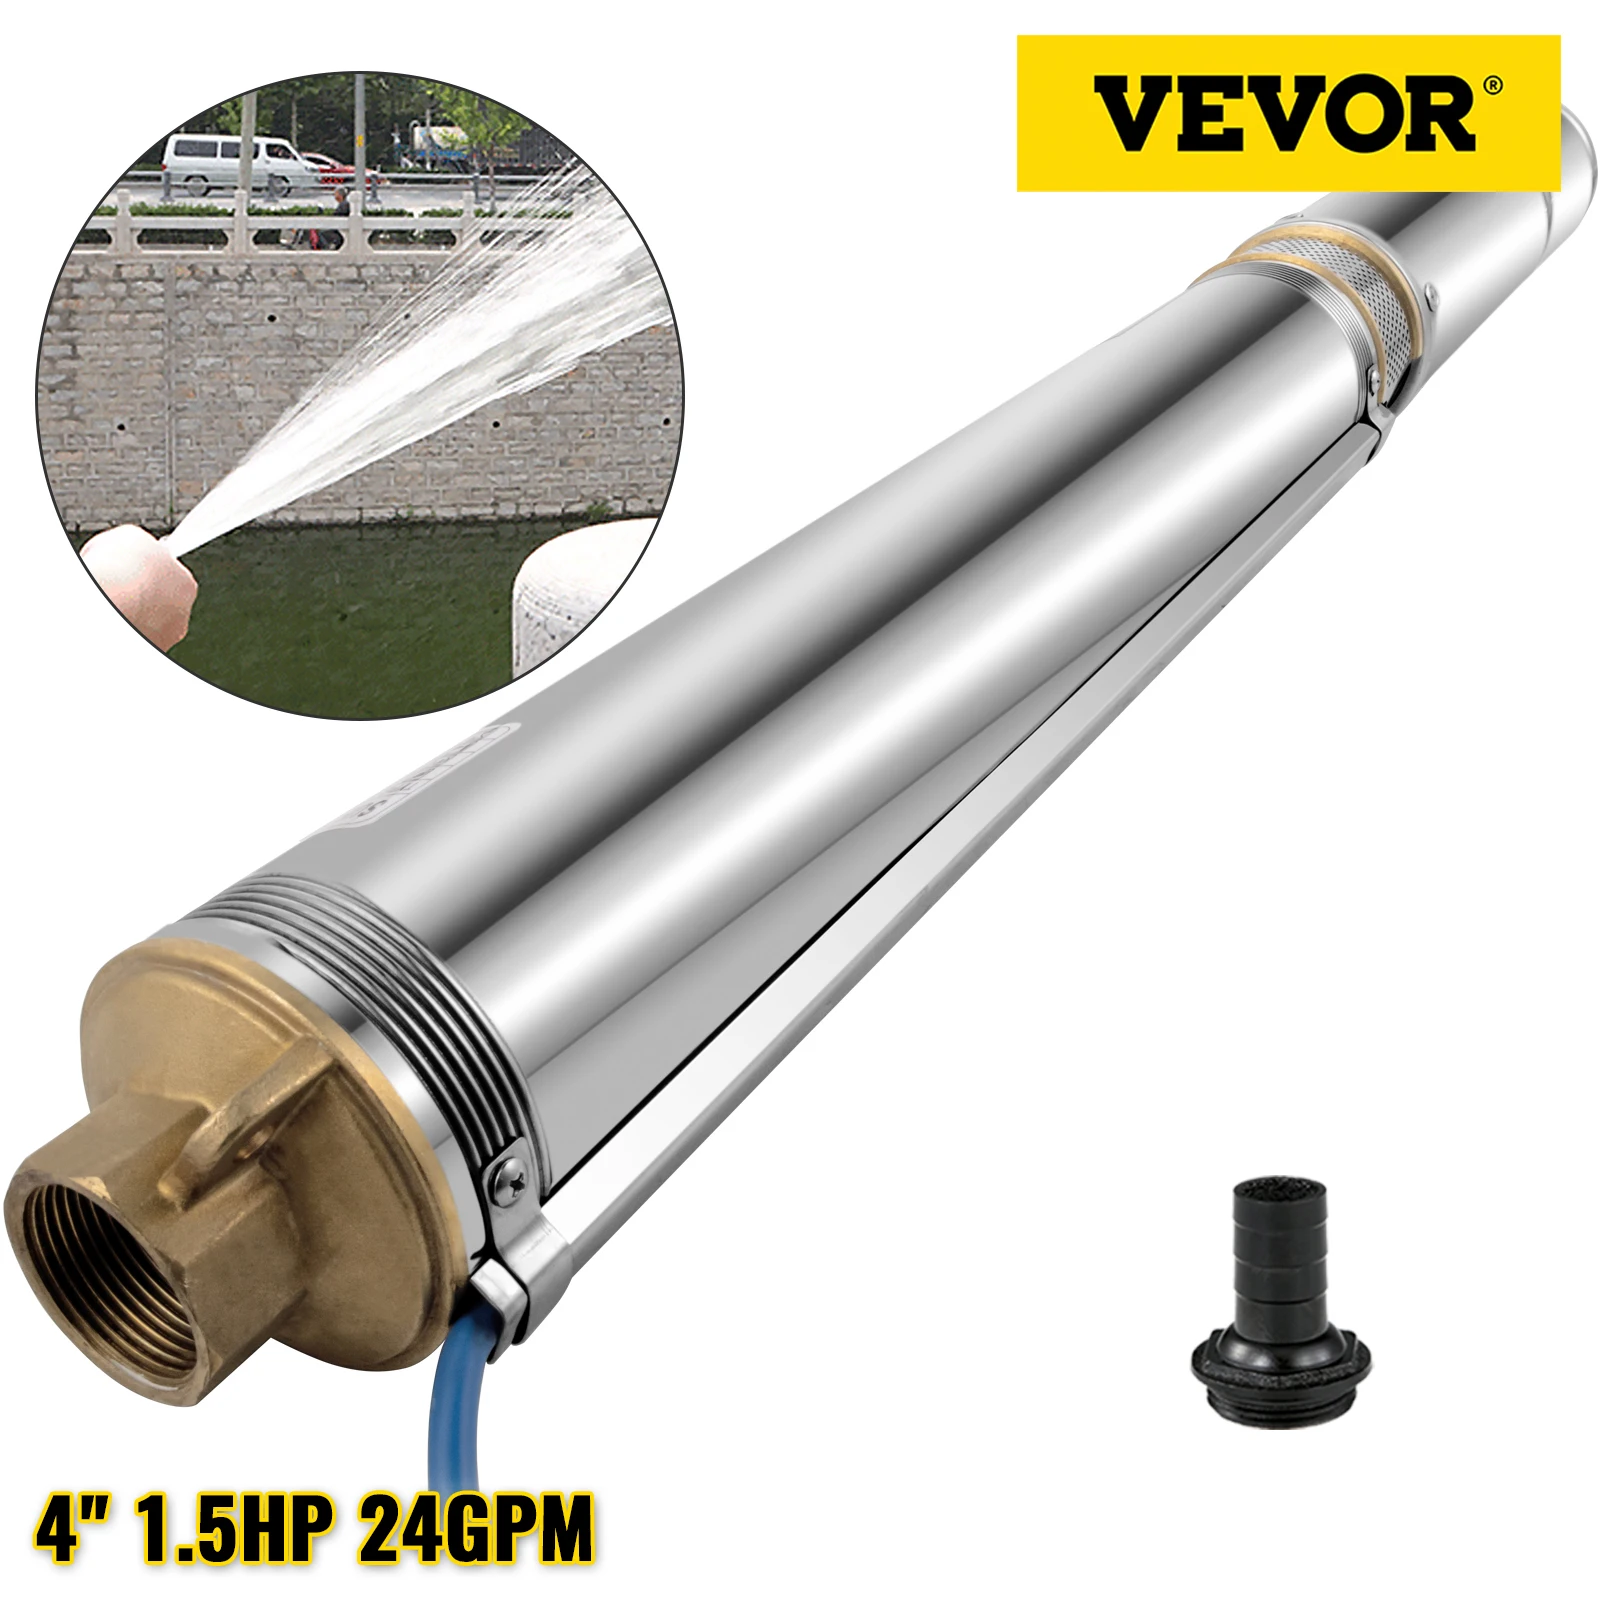 

VEVOR 110V 1.5HP Deep Well Pump 24GPM Submersible Pump with 131ft Cable Stainless Steel Solar Water Pump Agricultural Irrigation